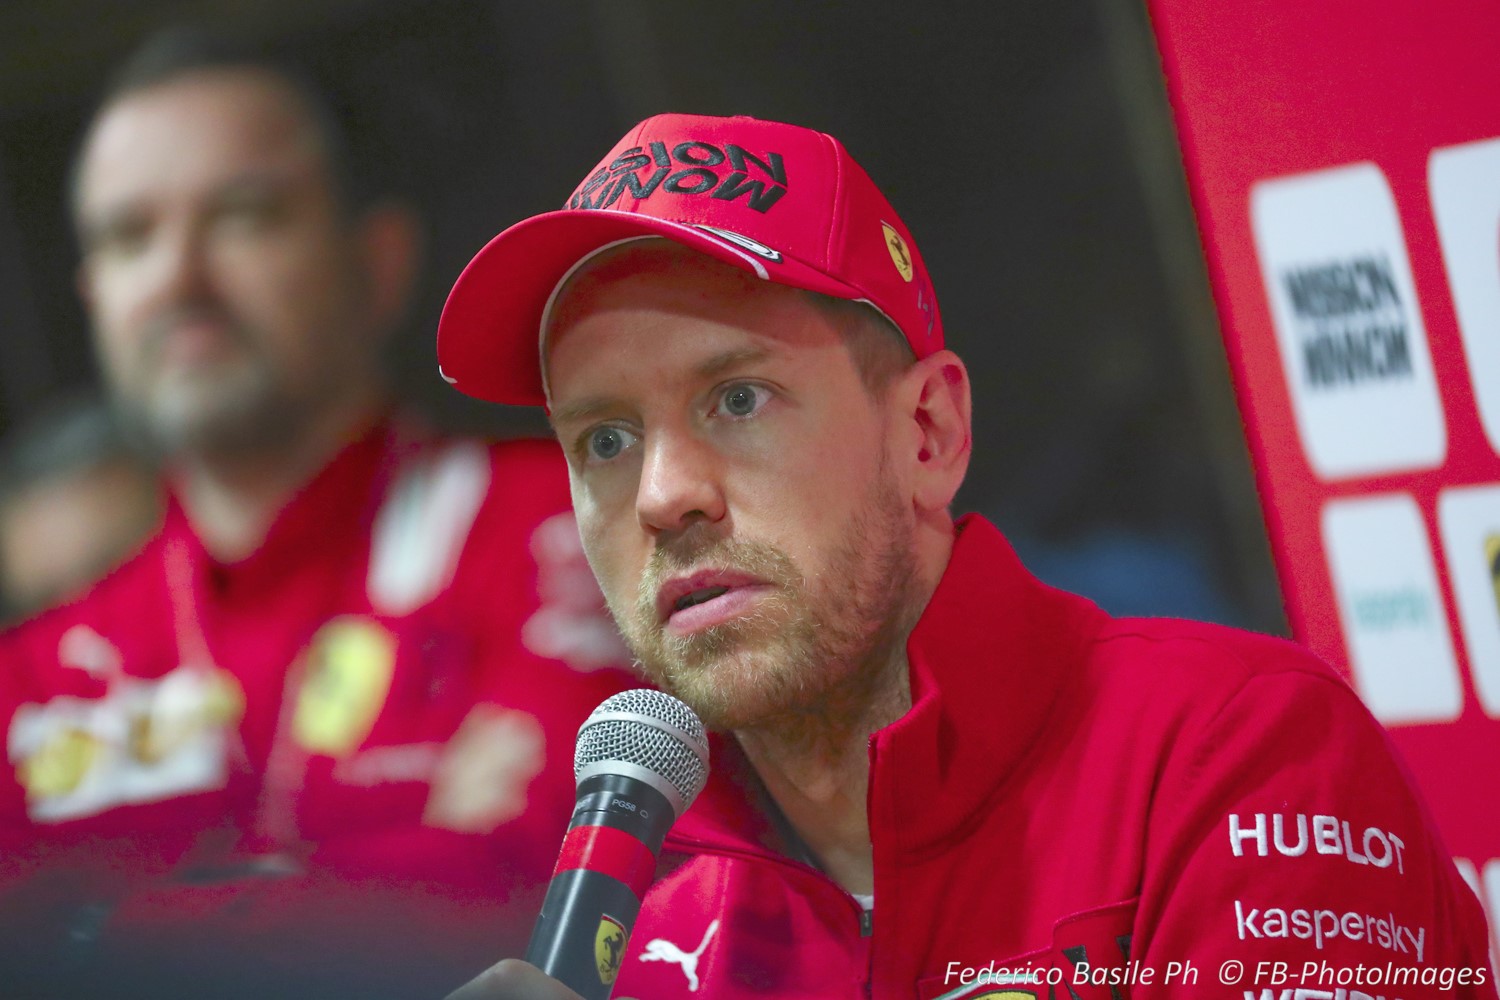 Sources says Vettel is pissed off that Ferrari may have cheated and could choose to leave the team for McLaren